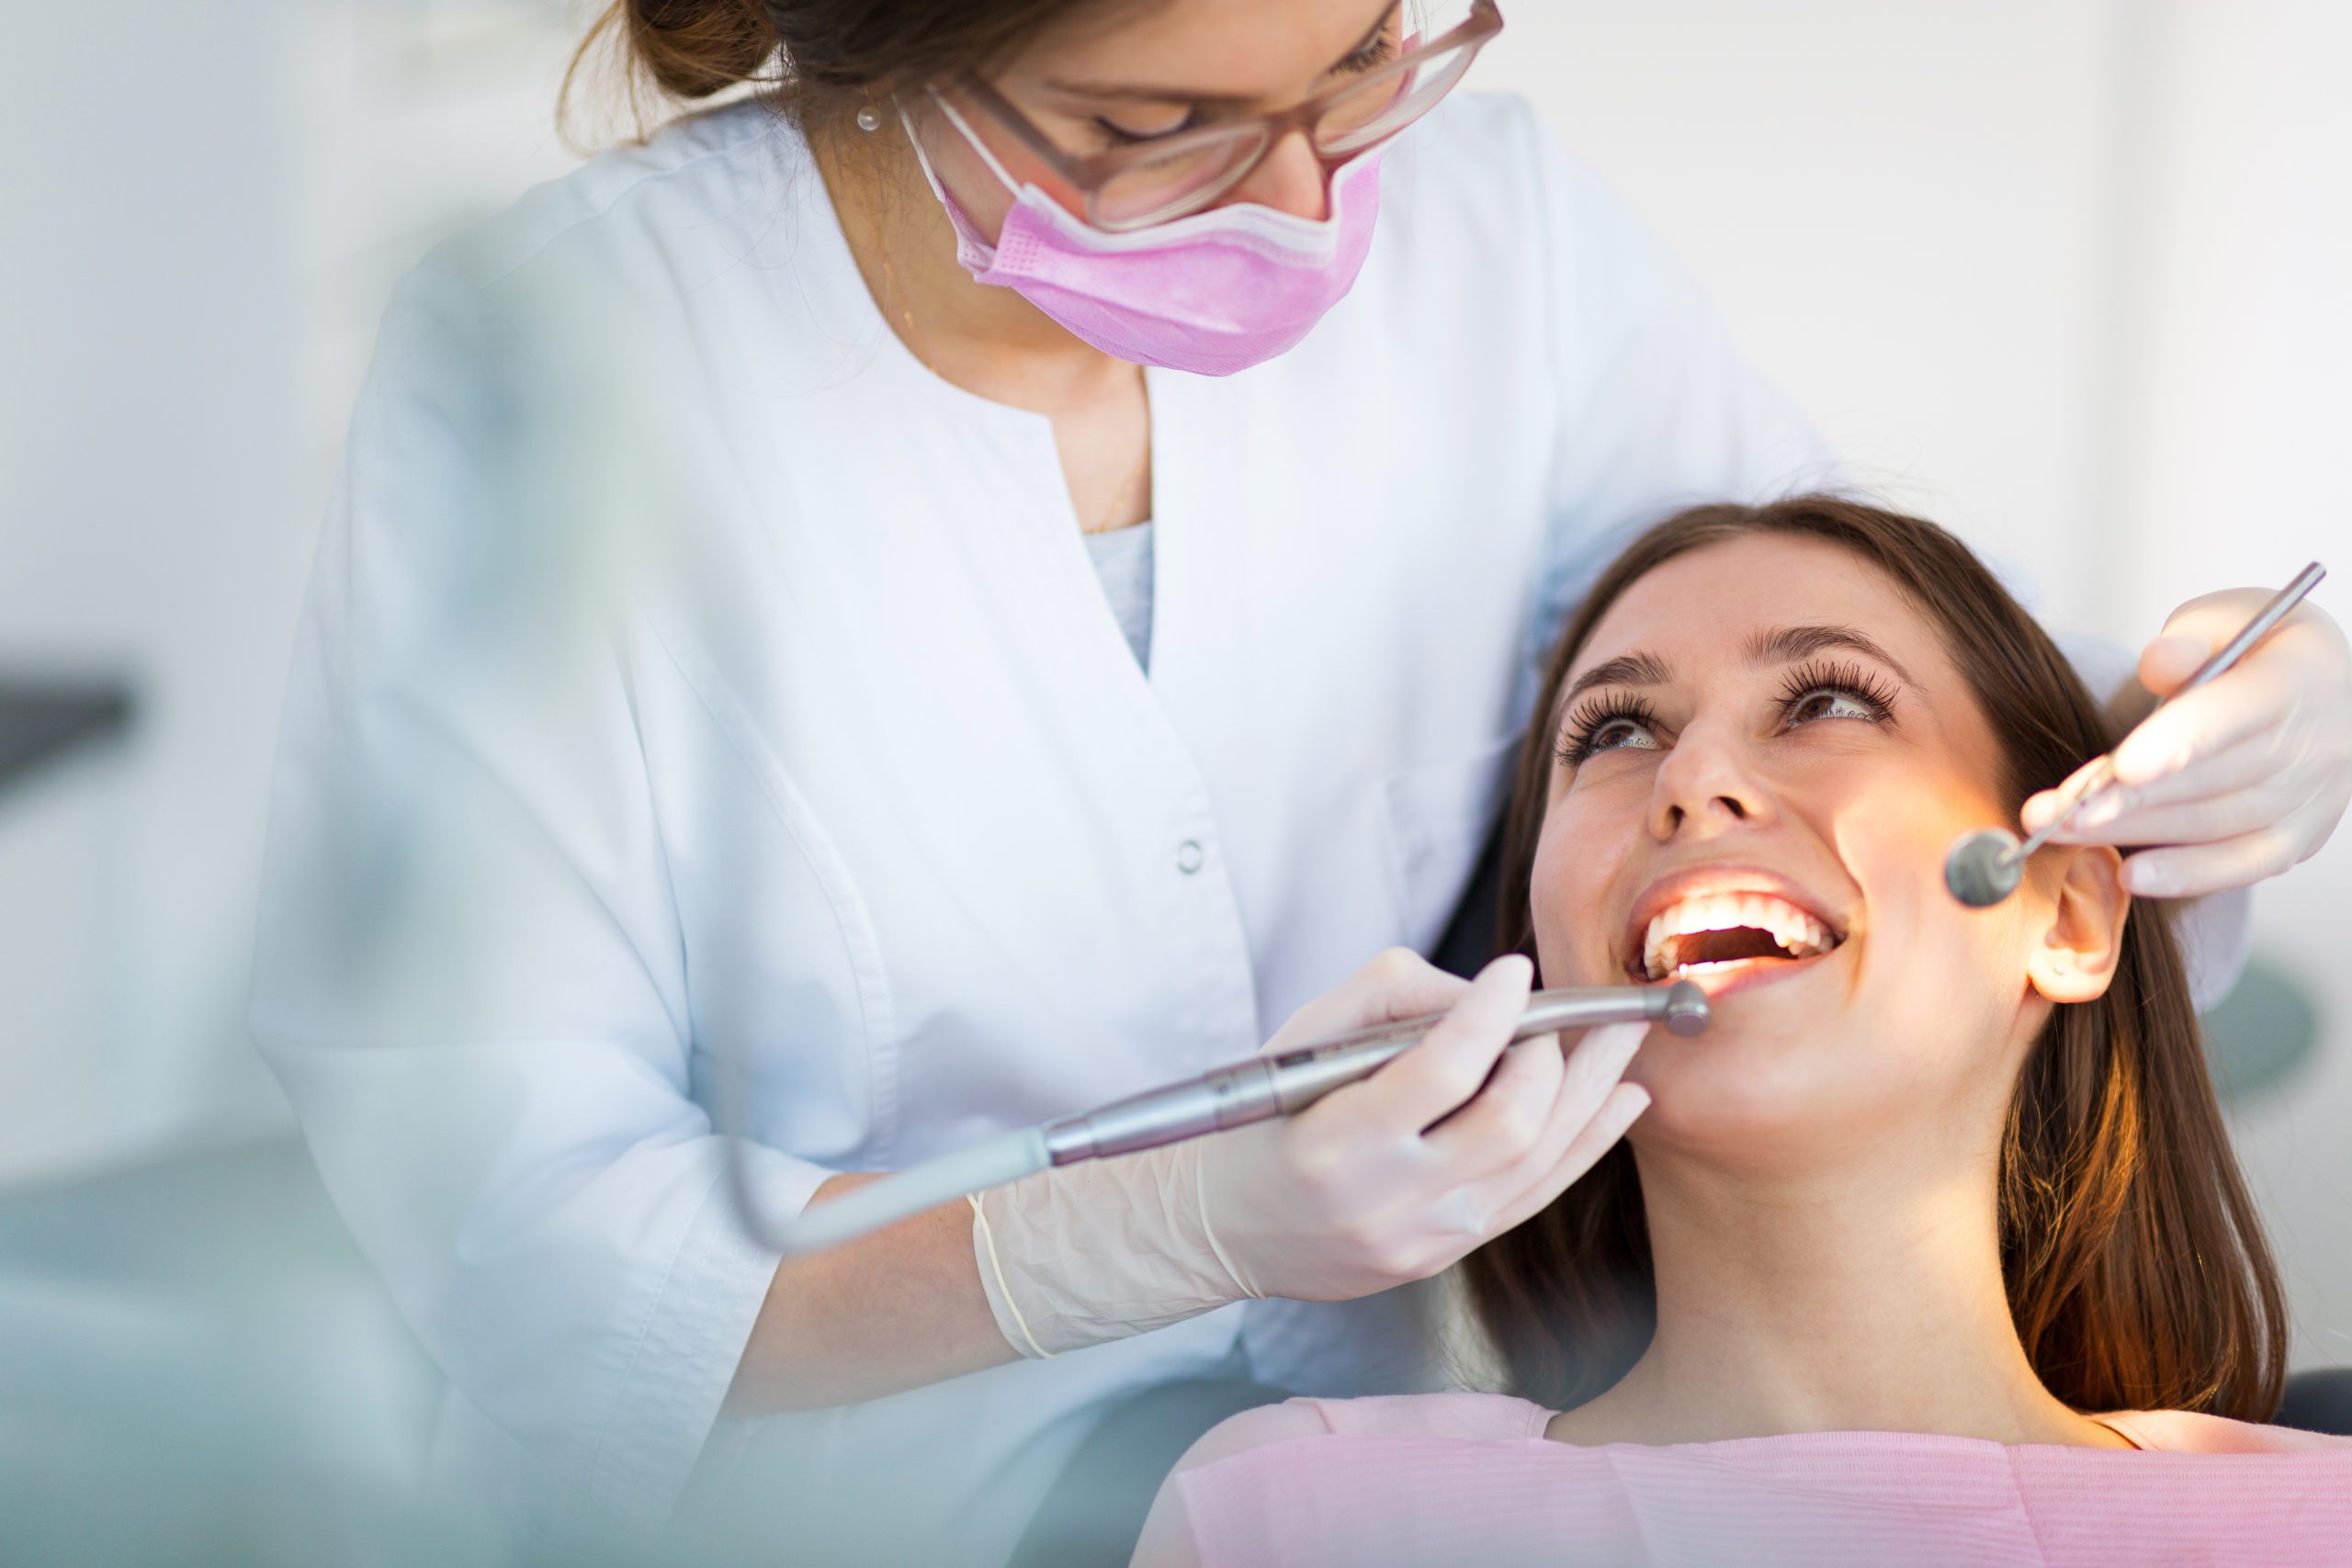 Woman smiling at her dentist during a dental procedure